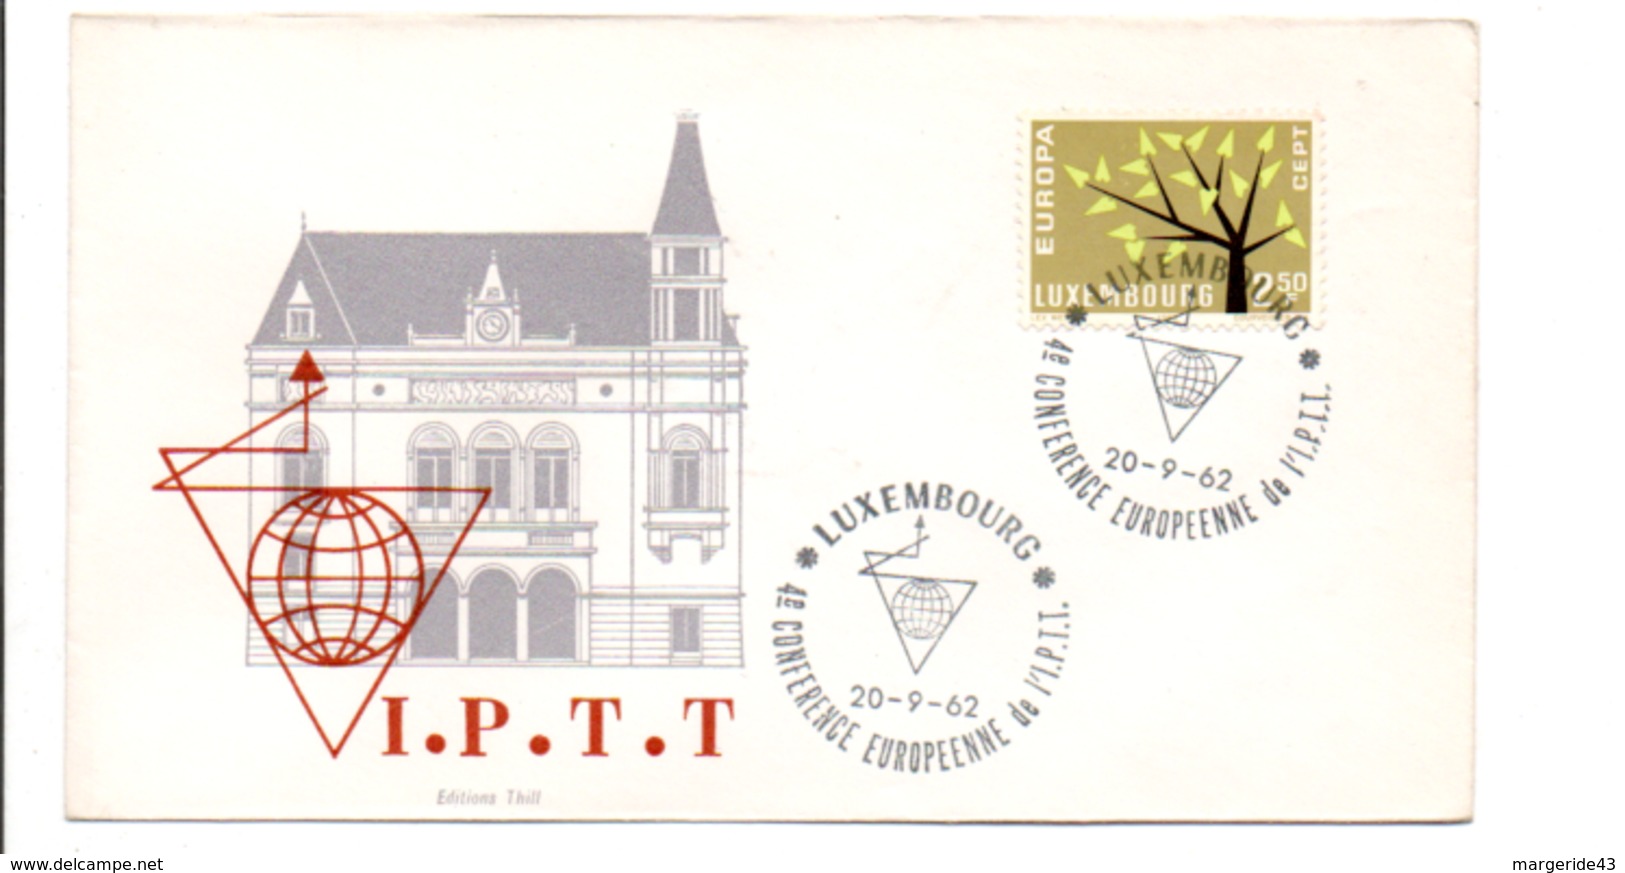 LUXEMBOURG OBLITERATION CONFERENCE EUROPEENNE I P T T 1962 - Maschinenstempel (EMA)